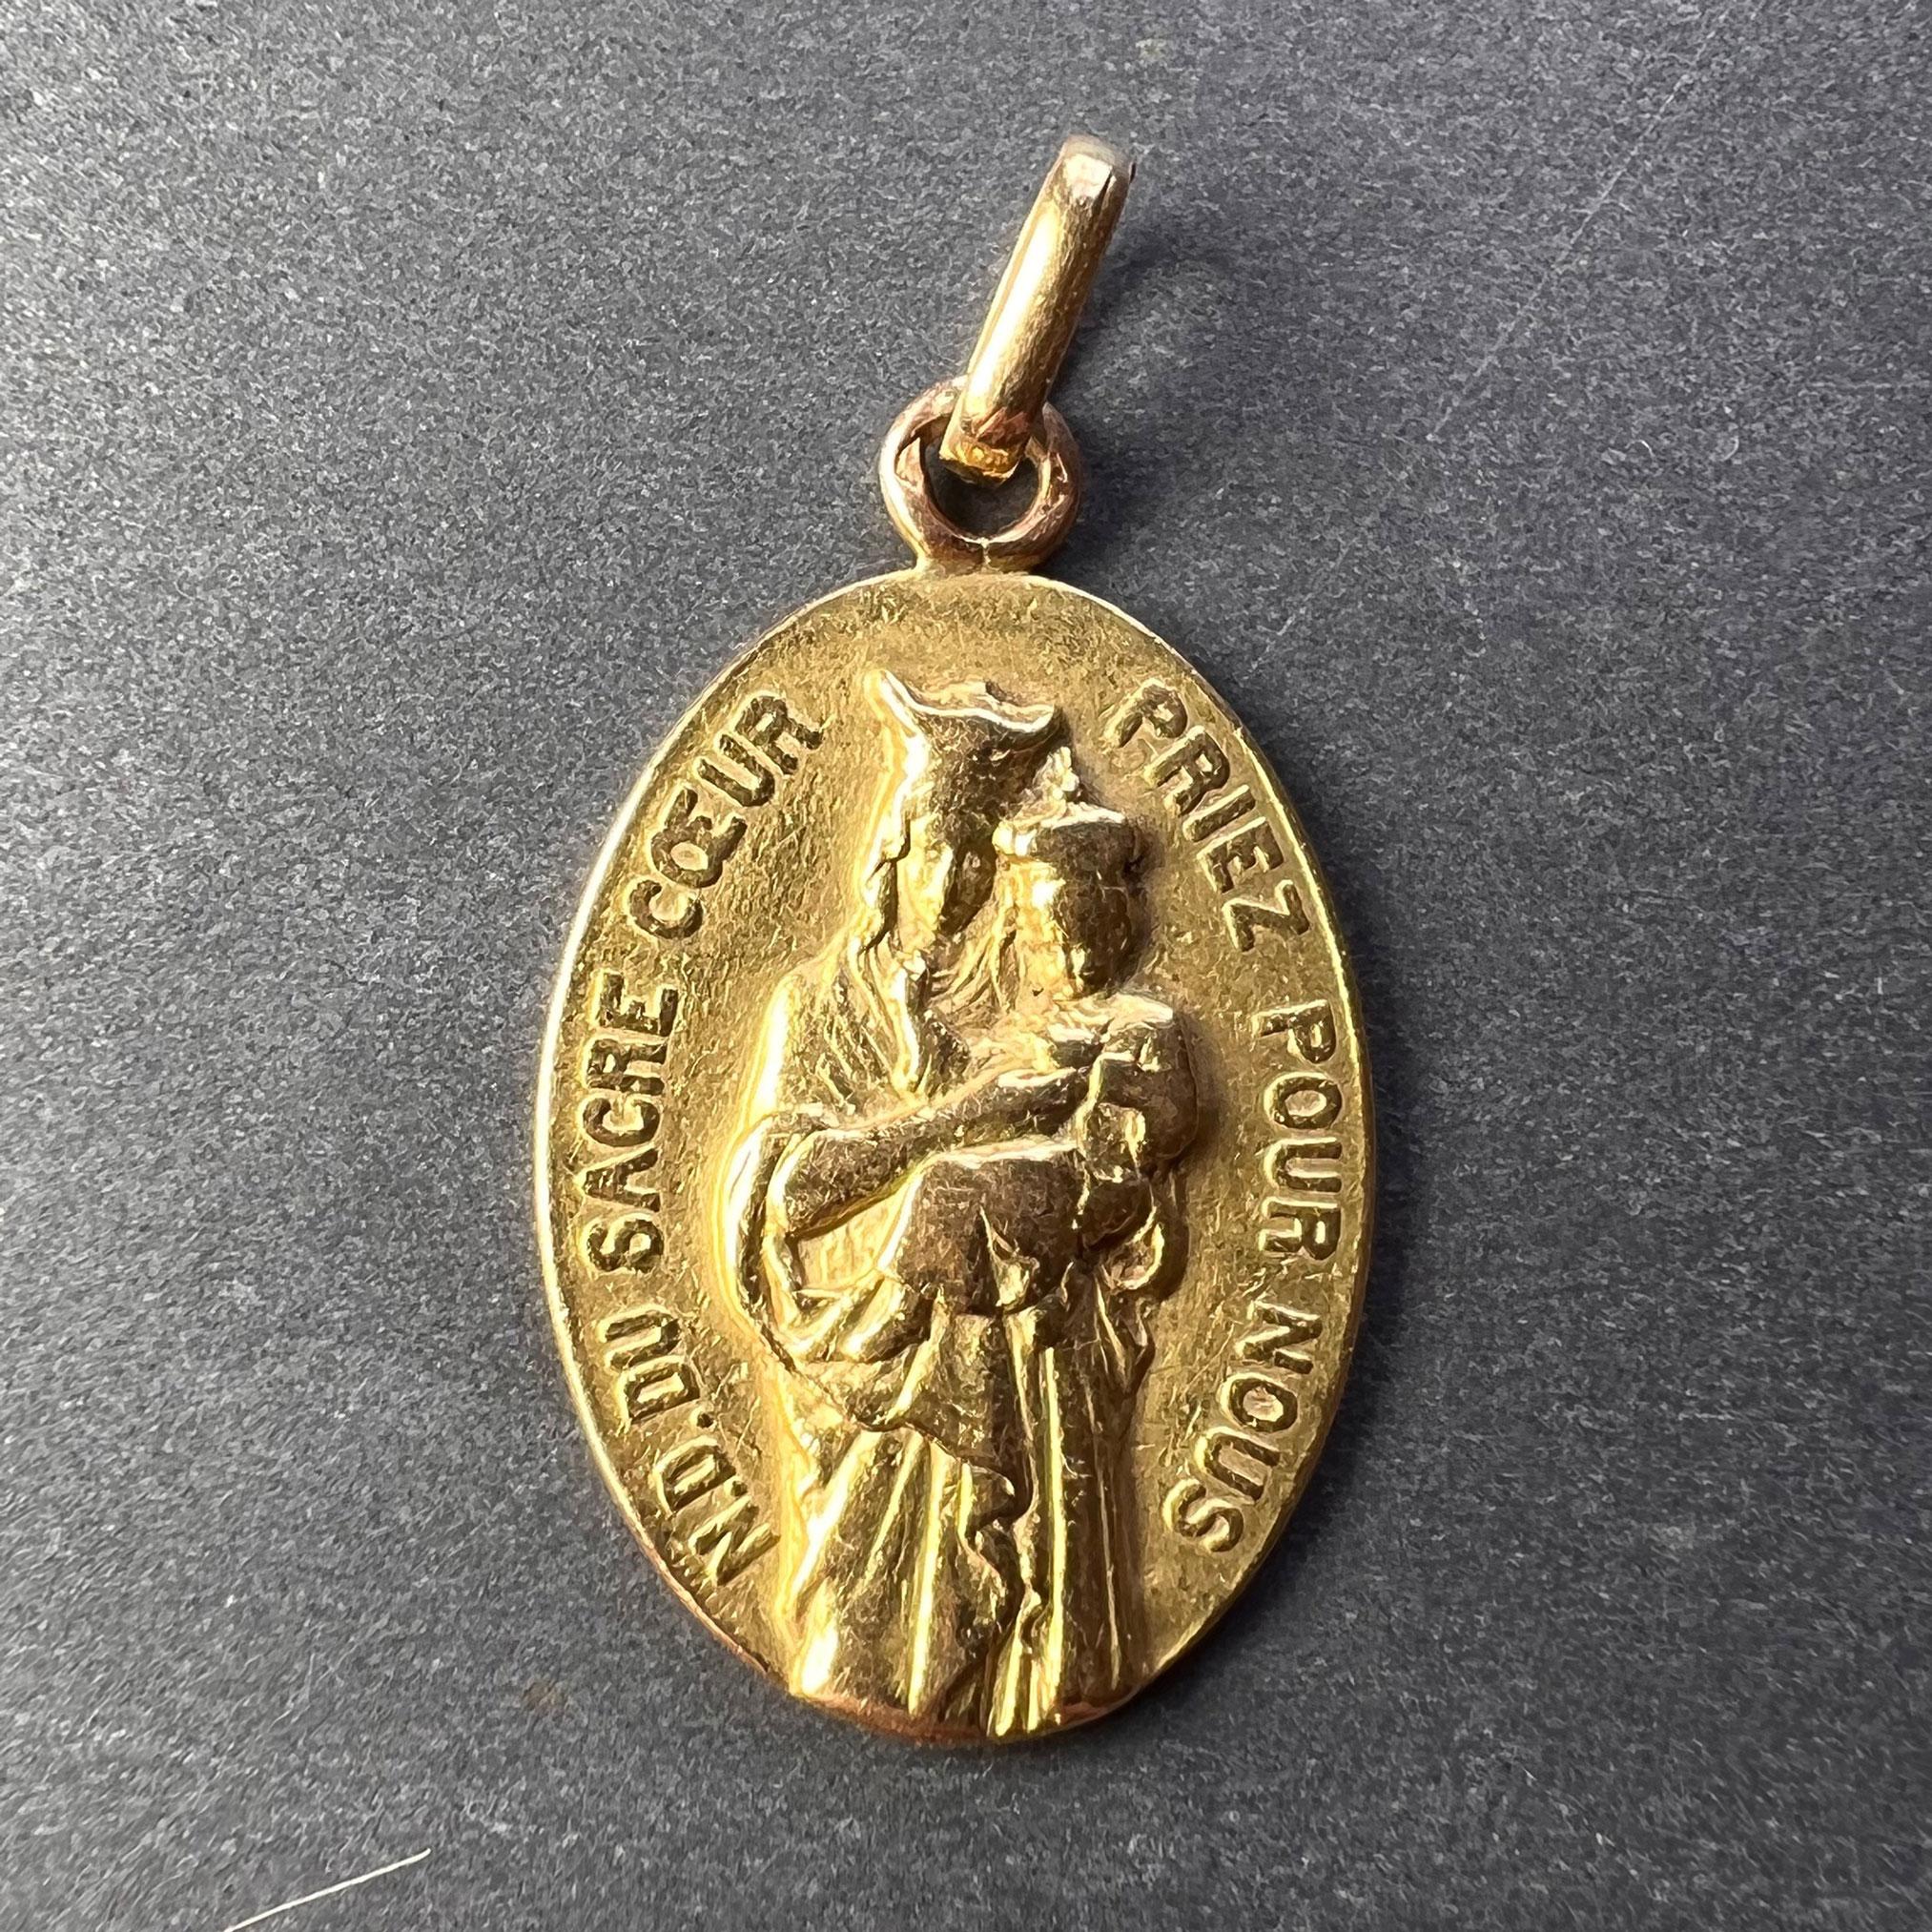 An 18 karat (18K) yellow gold charm pendant designed as an oval depicting the Virgin Mary with the phrase ‘N.D. (Notre Dame) Du Sacre Coeur Priez Pour Nous’ (trans. Our Lady of the Sacred Heart Pray for Us) around the edge. Stamped with the eagle